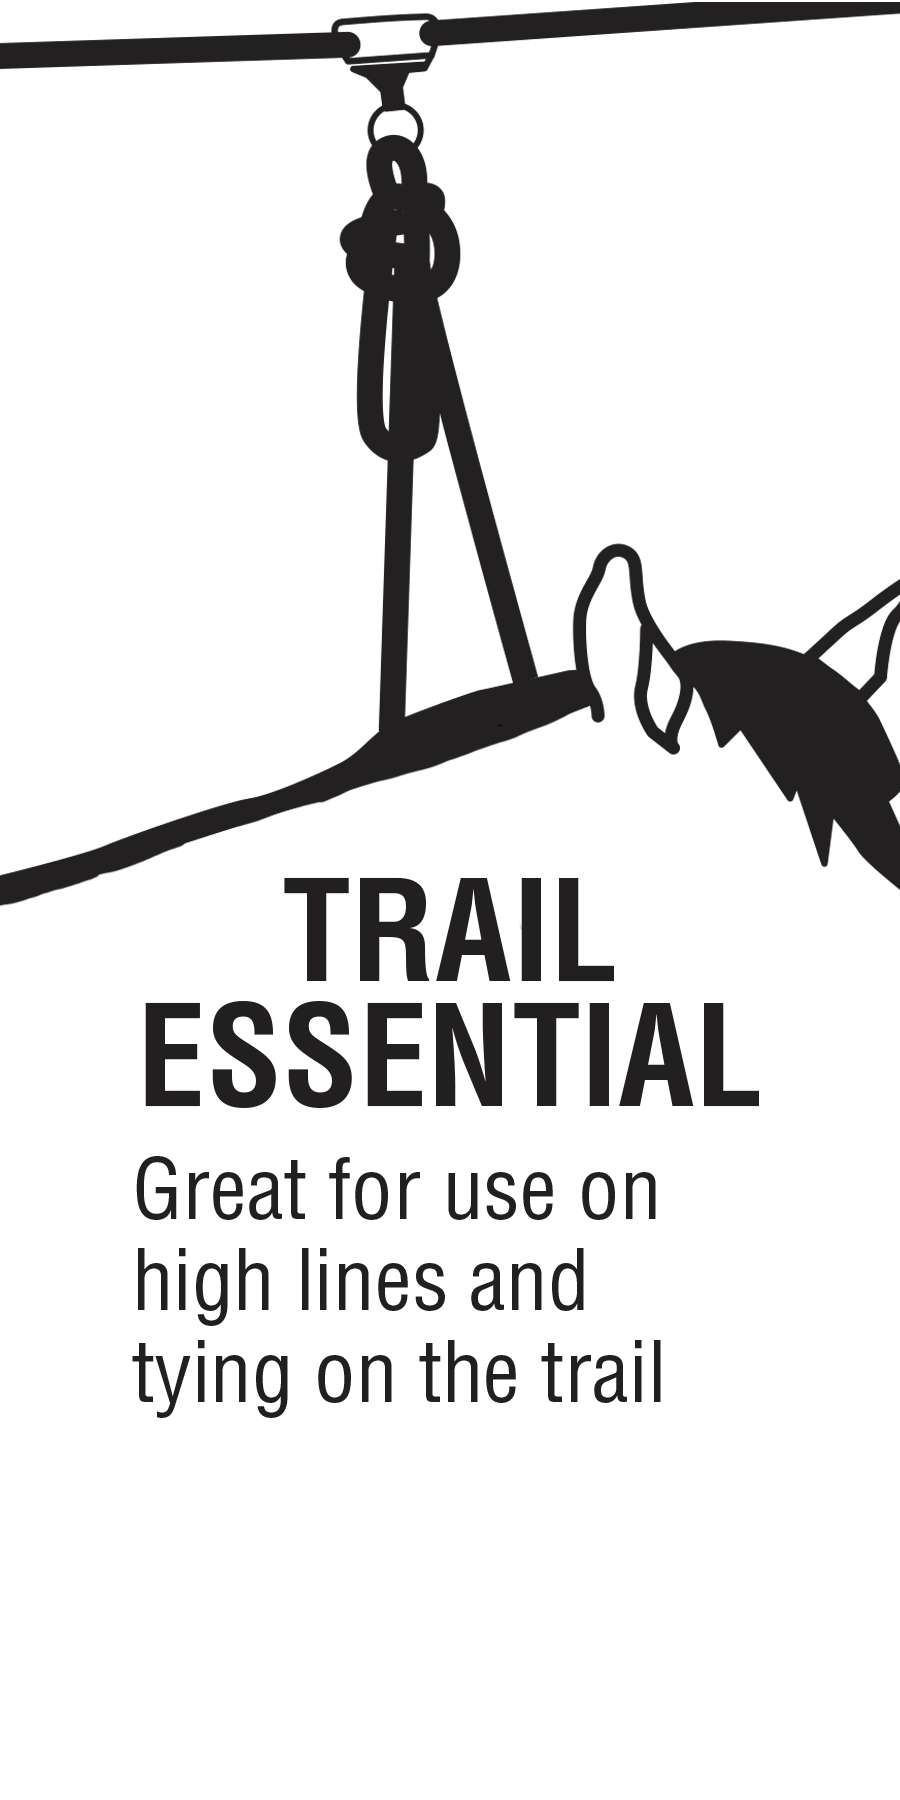 Great for use on high lines and tying on the trail